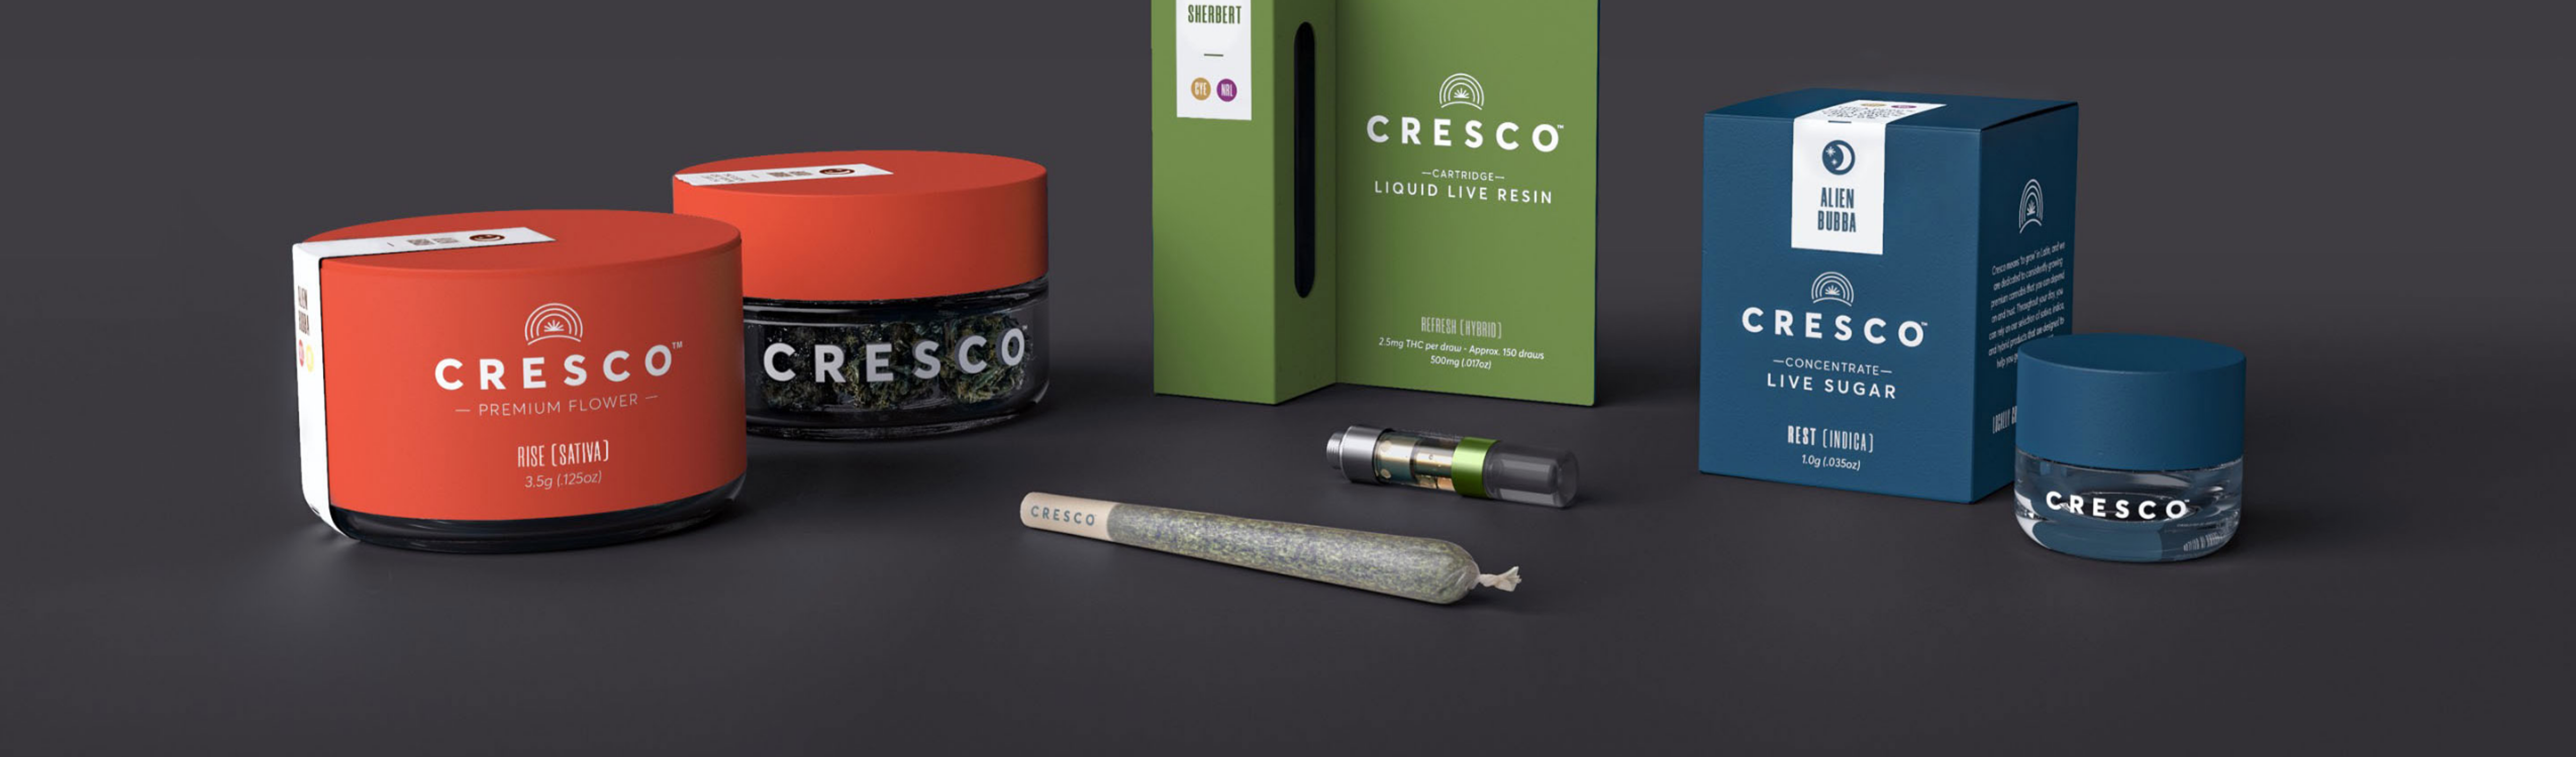 Cresco Labs To Start Adult-Use Cannabis Sales In Phoenix On Heels of Election Day Legalization